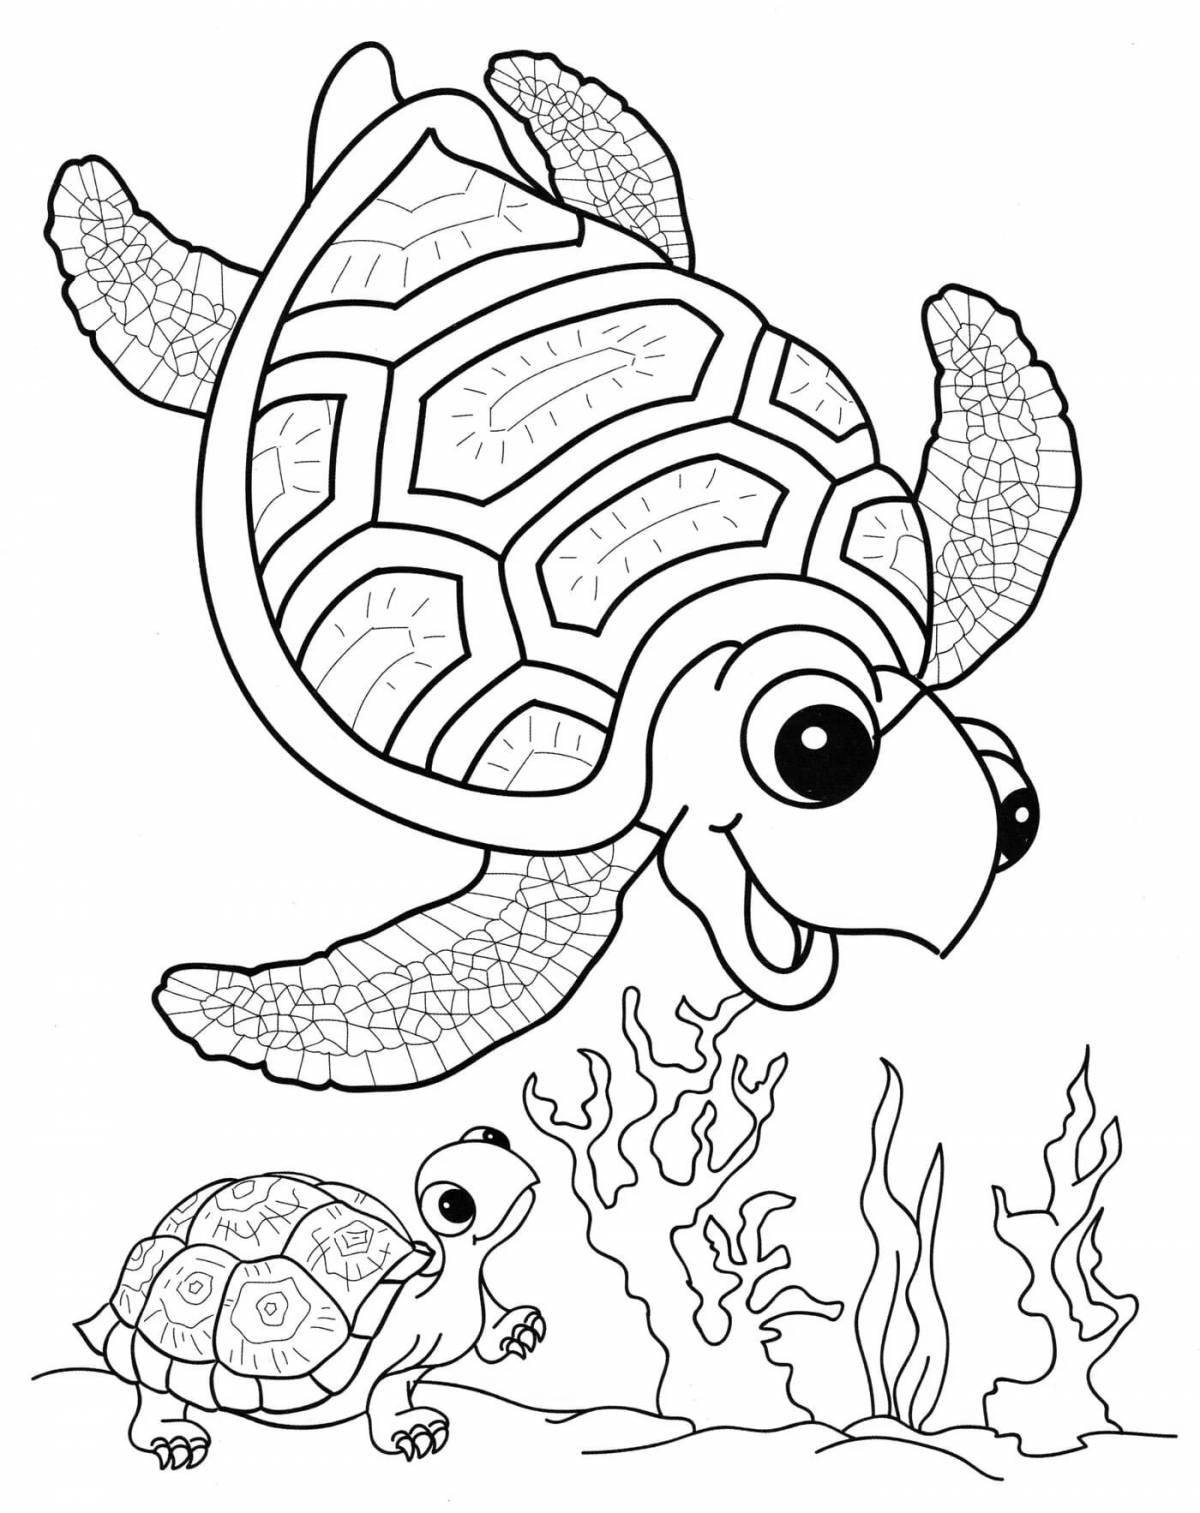 Cute sea life coloring book for 4-5 year olds